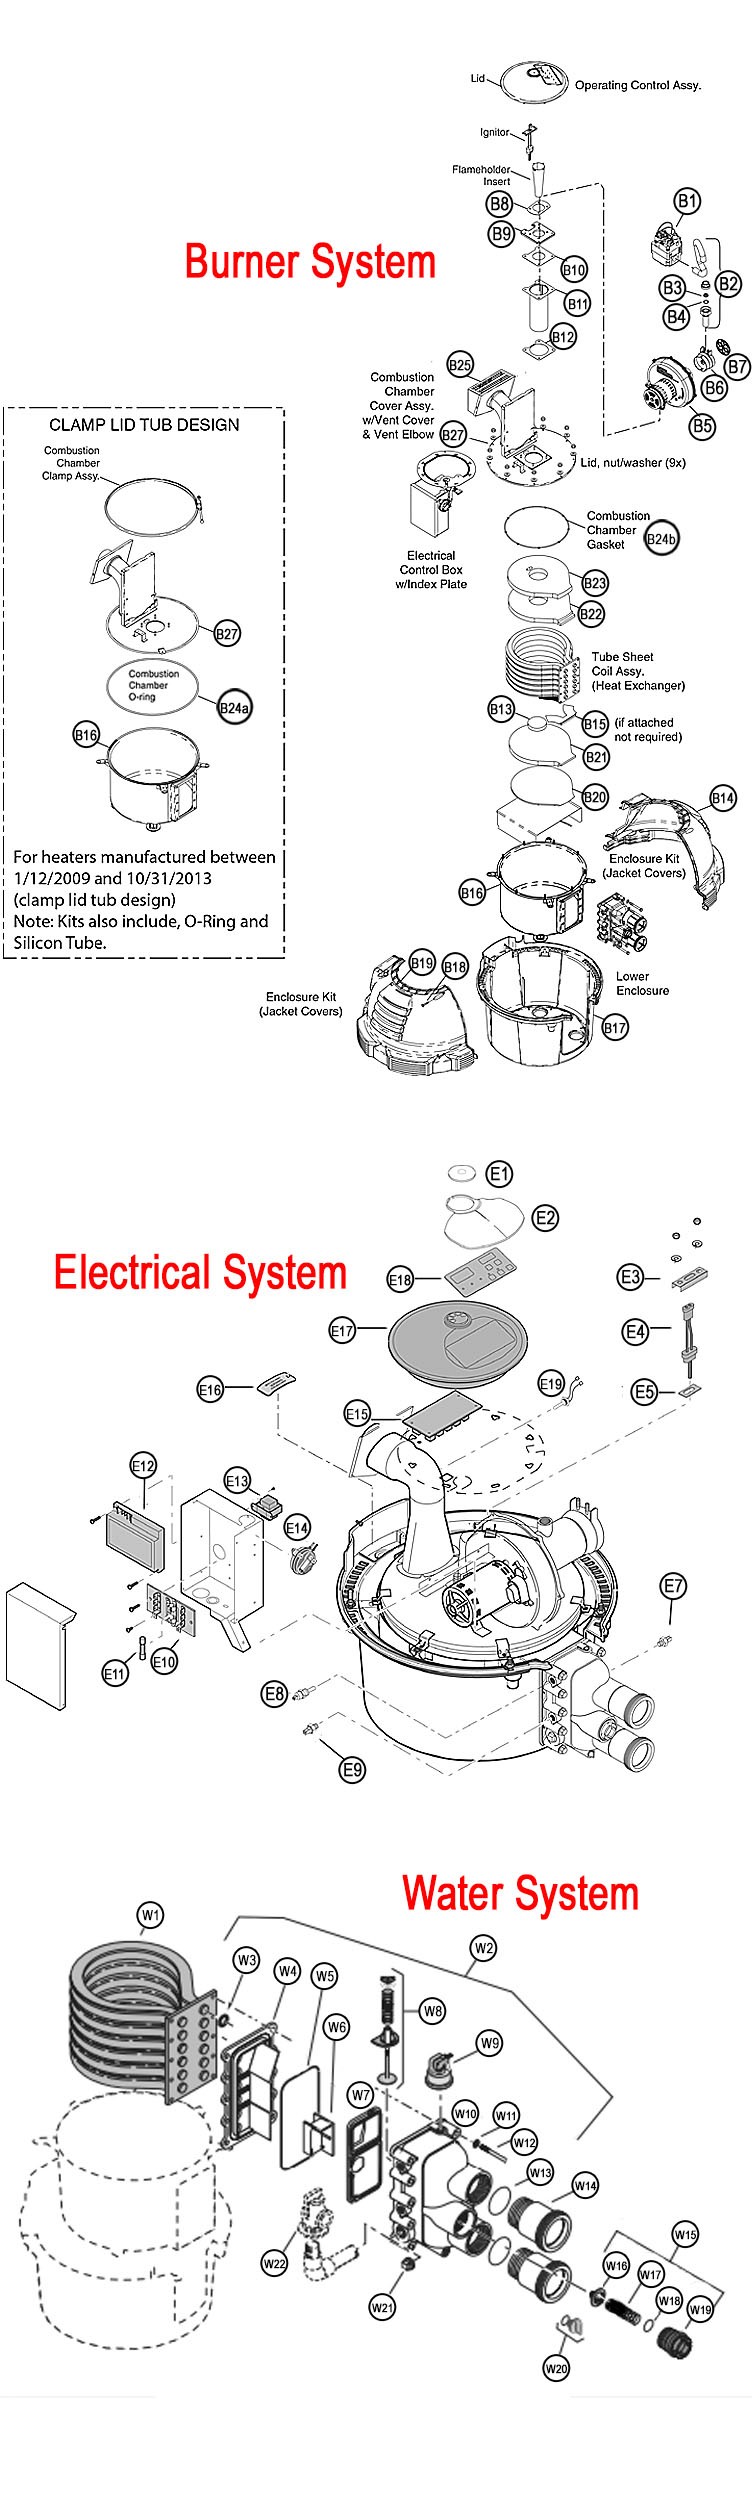 Sta-Rite Max-E-Therm Low NOx Pool Heater - Electronic Ignition - Natural Gas - 250,000 BTU ASME - 460767 Parts Schematic